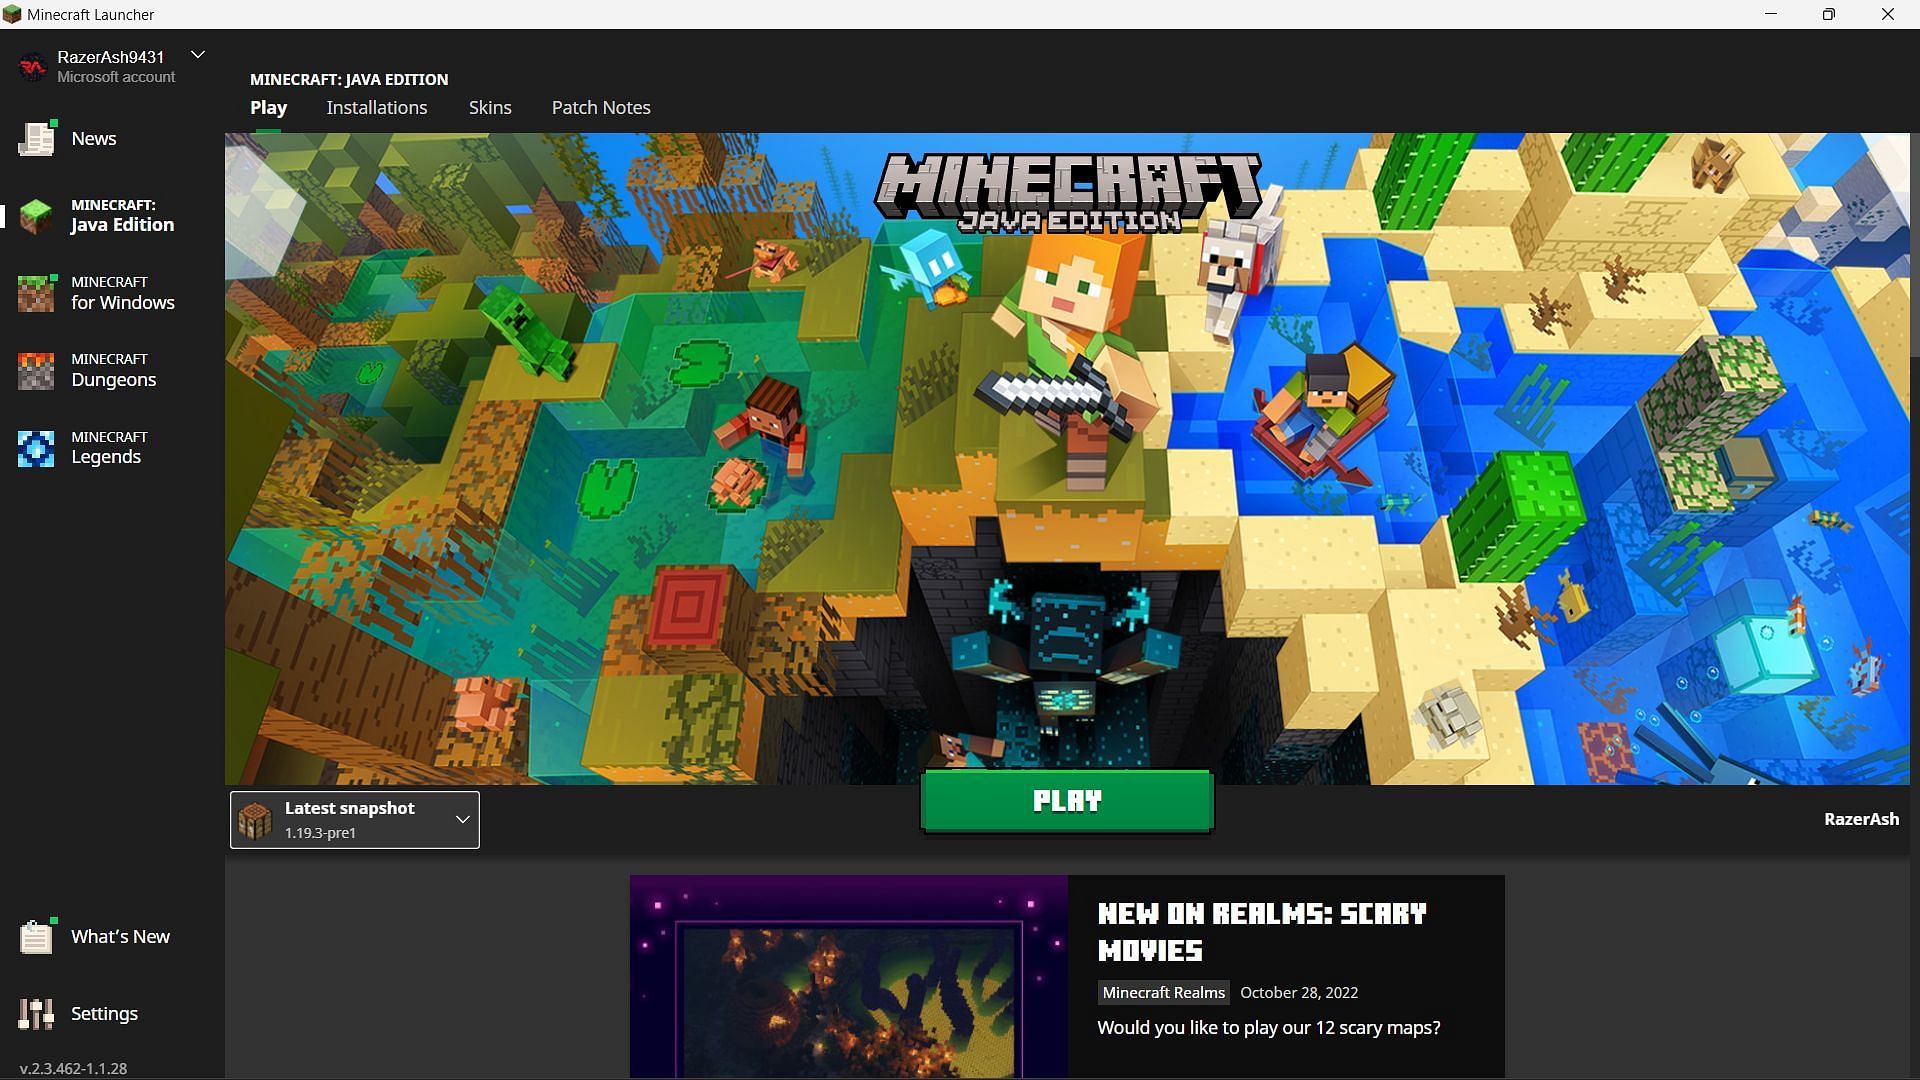 Open the official launcher to download Minecraft 1.19.3 pre-release 1 (Image via Sportskeeda)